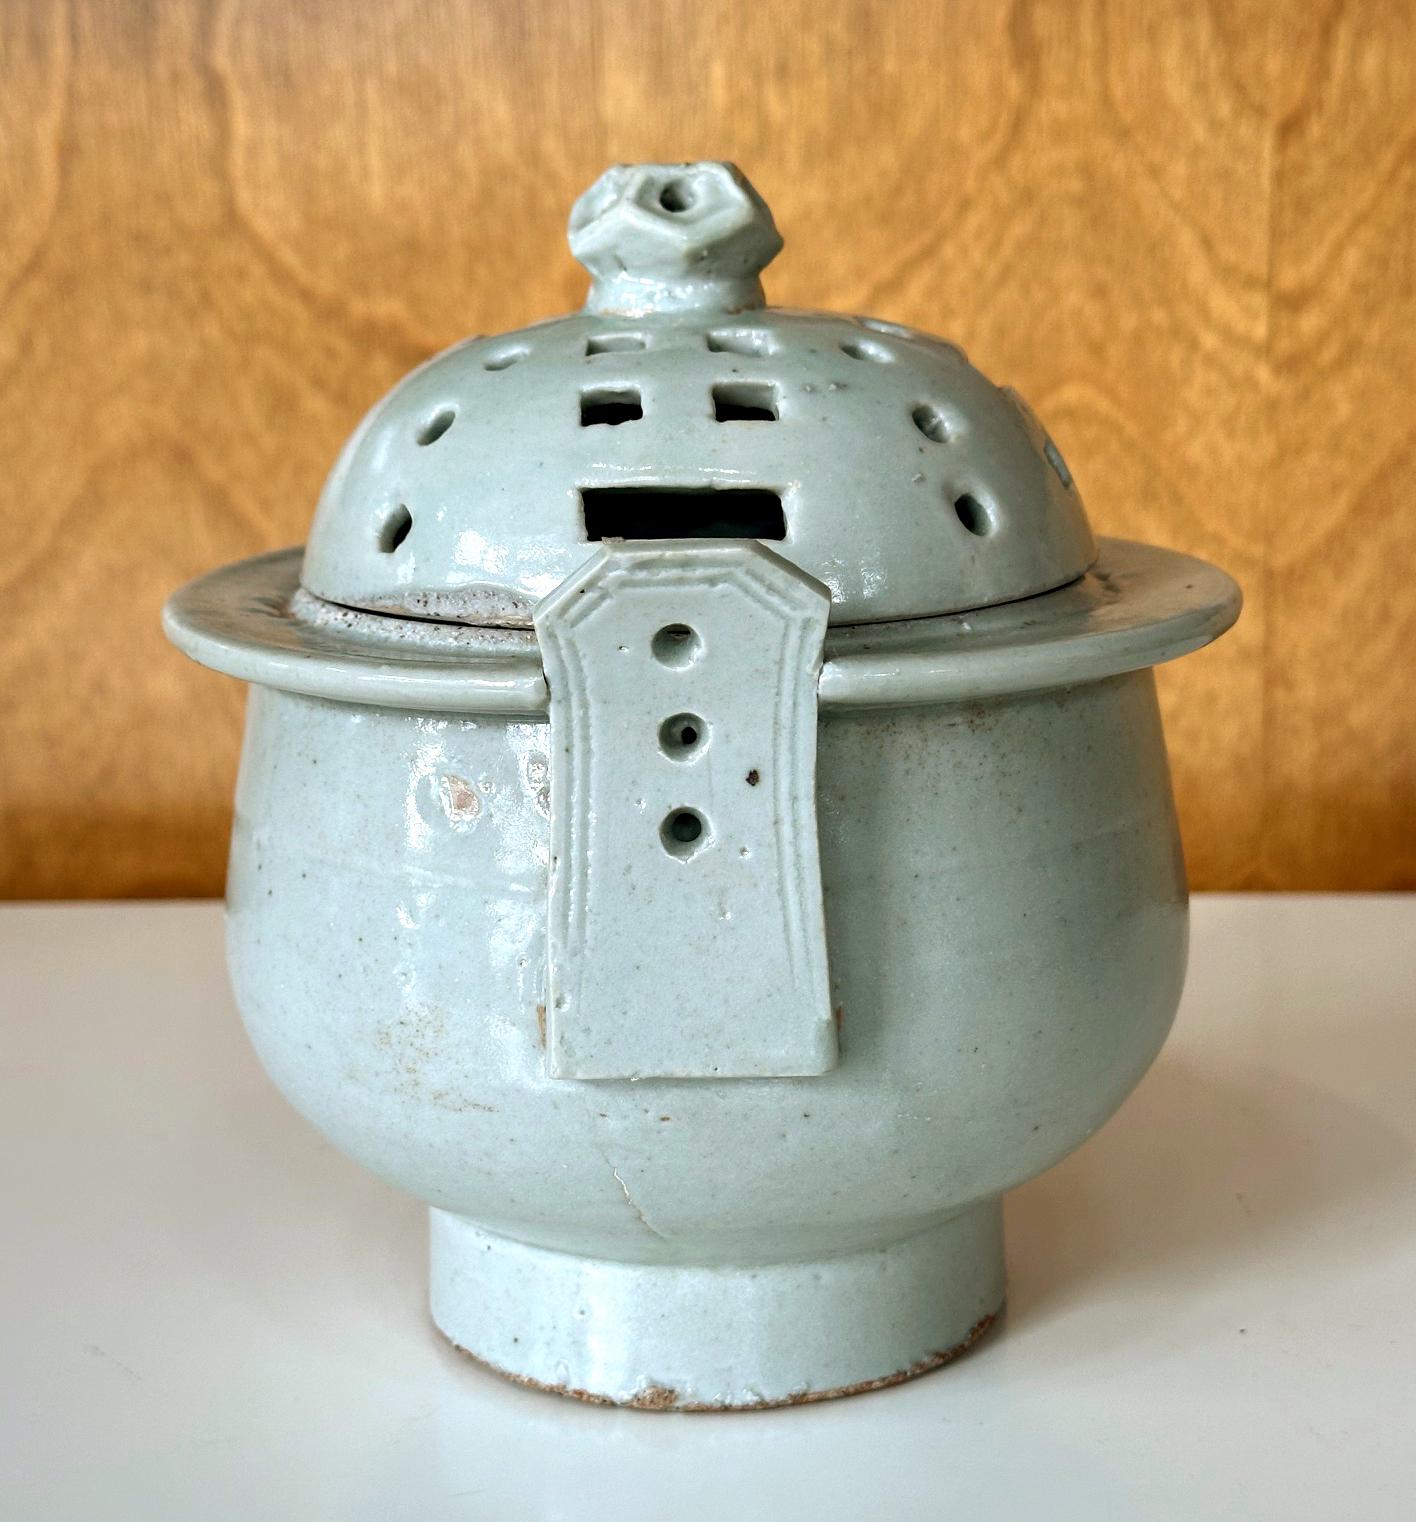 An antique Korean ritual incense burner circa 19th century (late Joseon dynasty). This type of porcelain incense burner was made in Bunwon Kiln in Gwangju, Gyeonggi Do, near Seoul. Used in ceremonial occasions, the vessel was potted in steady and